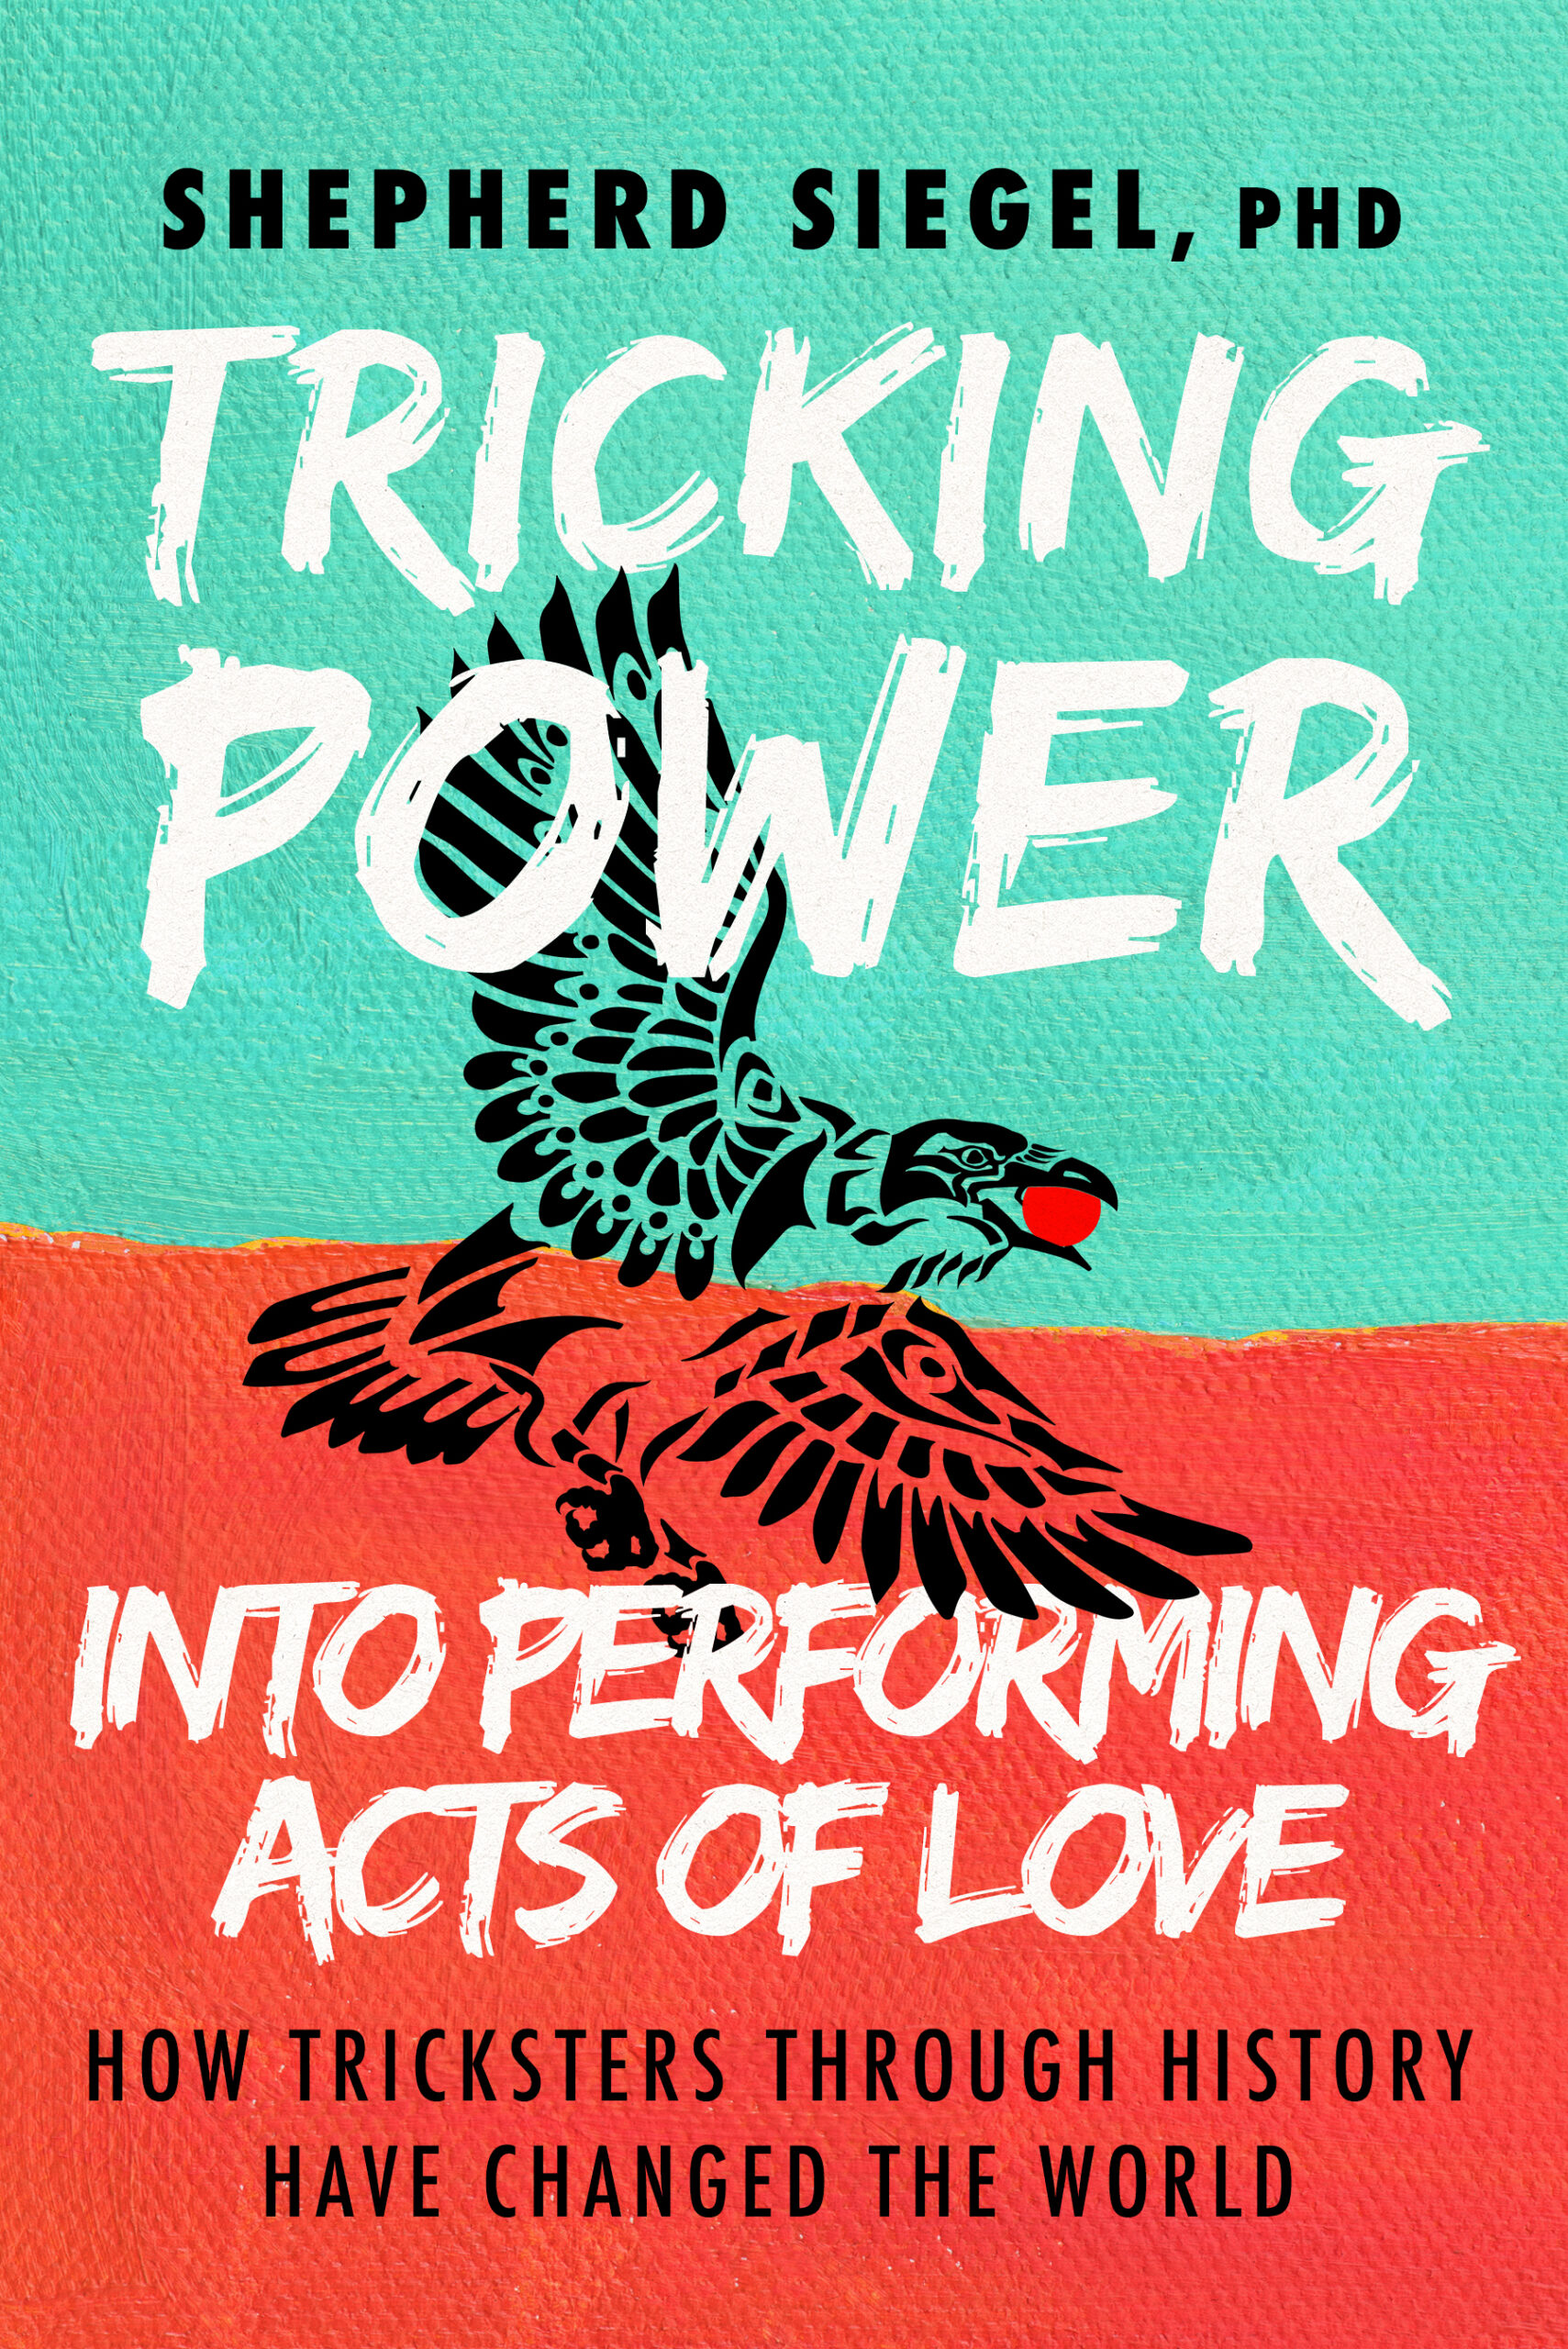 Tricking Power into Performing Acts of Love by Shepherd Siegel